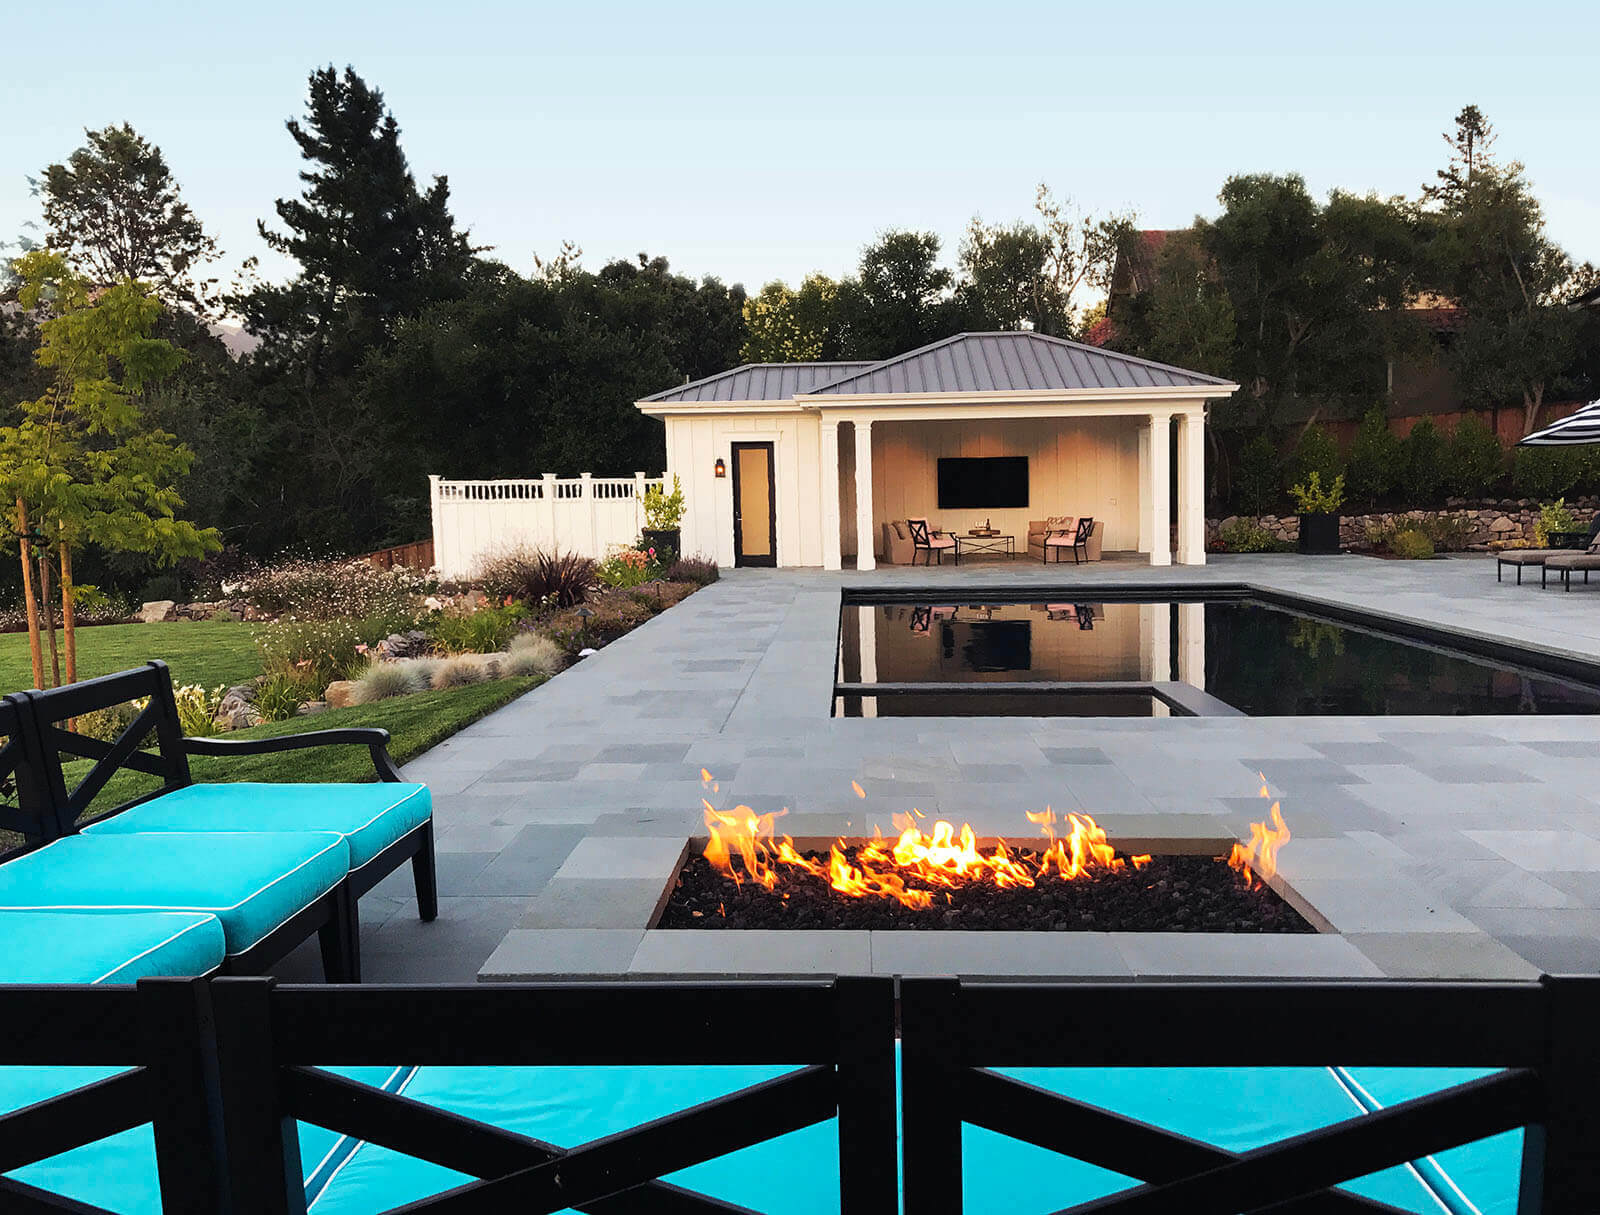 Black wooden chairs with light blue accent cushions wrapping around a short stone fireplace with black rock coals, looking on to a tranquil dark pool and jacuzzi with covered lounging area in the back